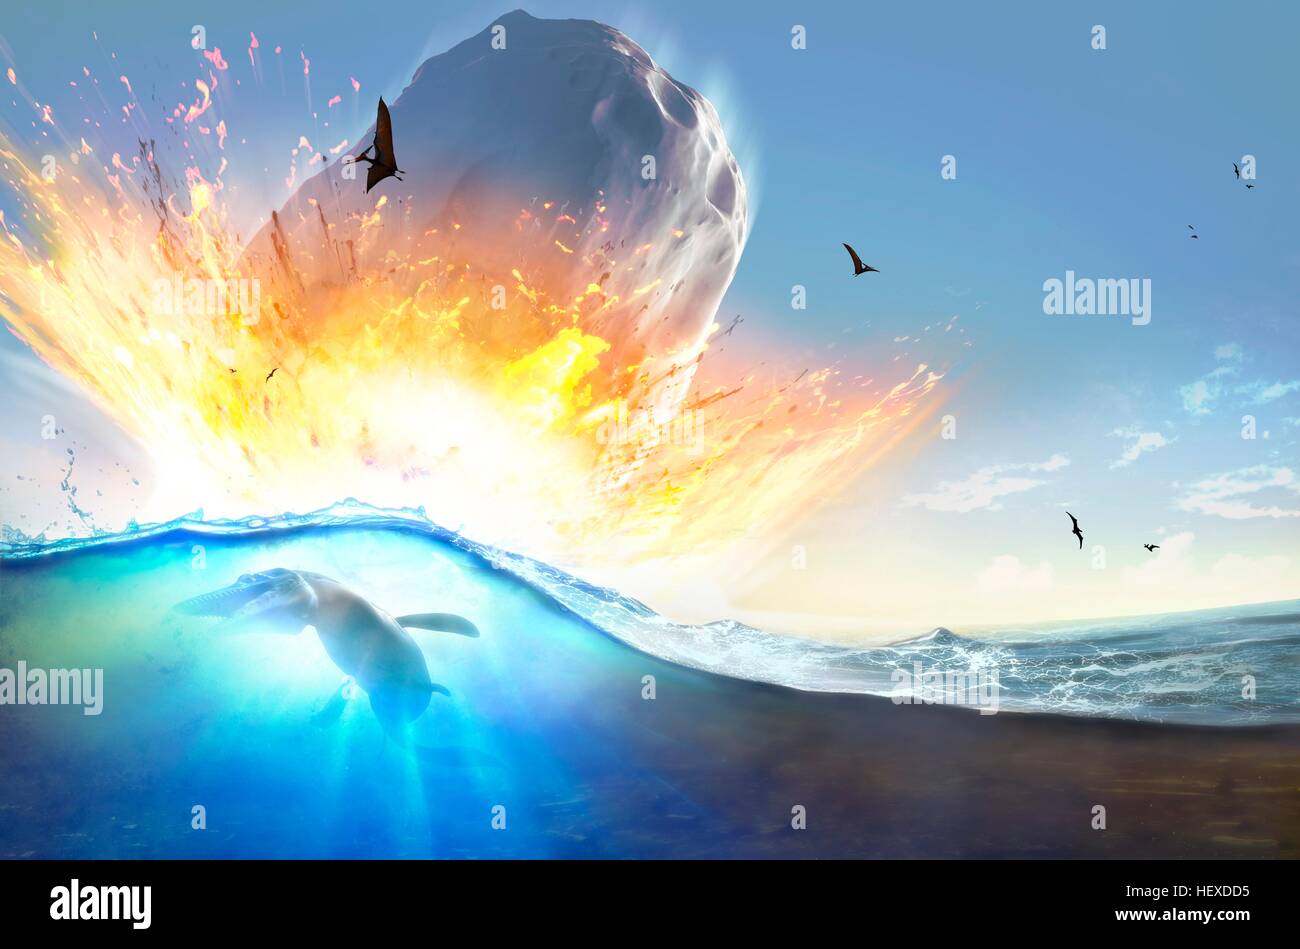 Asteroid impact.Illustration of large asteroid colliding Earth on Yucatan Peninsula in (what is modern day) Mexico.This impact is believed to have led to death of dinosaurs some 65 million years ago.The impact formed Chicxulub crater,which is around 200 kilometres wide.The impact would have thrown Stock Photo